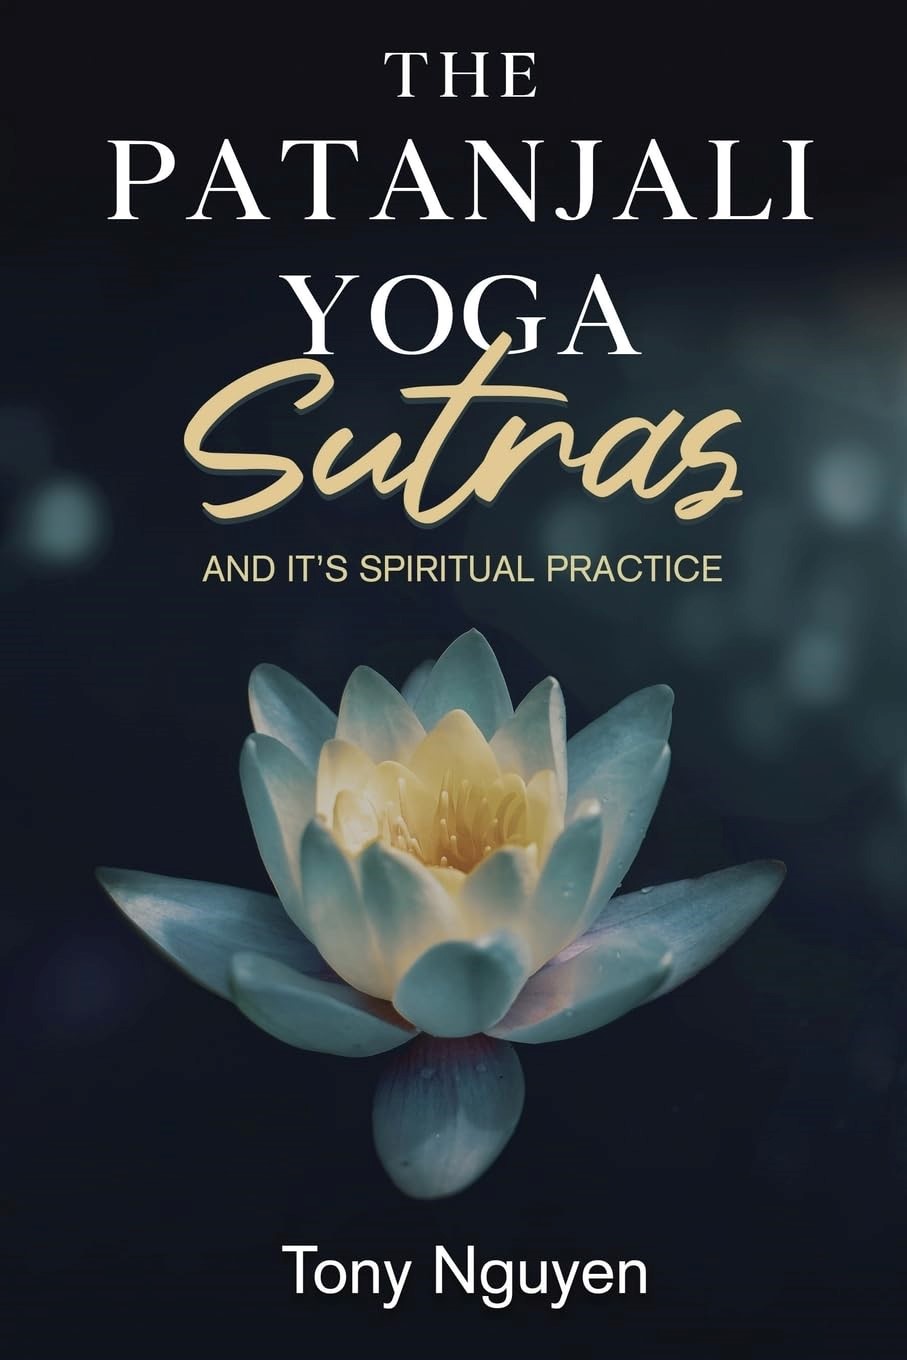 New Book Unveils the Philosophical Depths of Yoga: "The Patanjali Yoga Sutras and Its Spiritual Practice" by Tony Nguyen